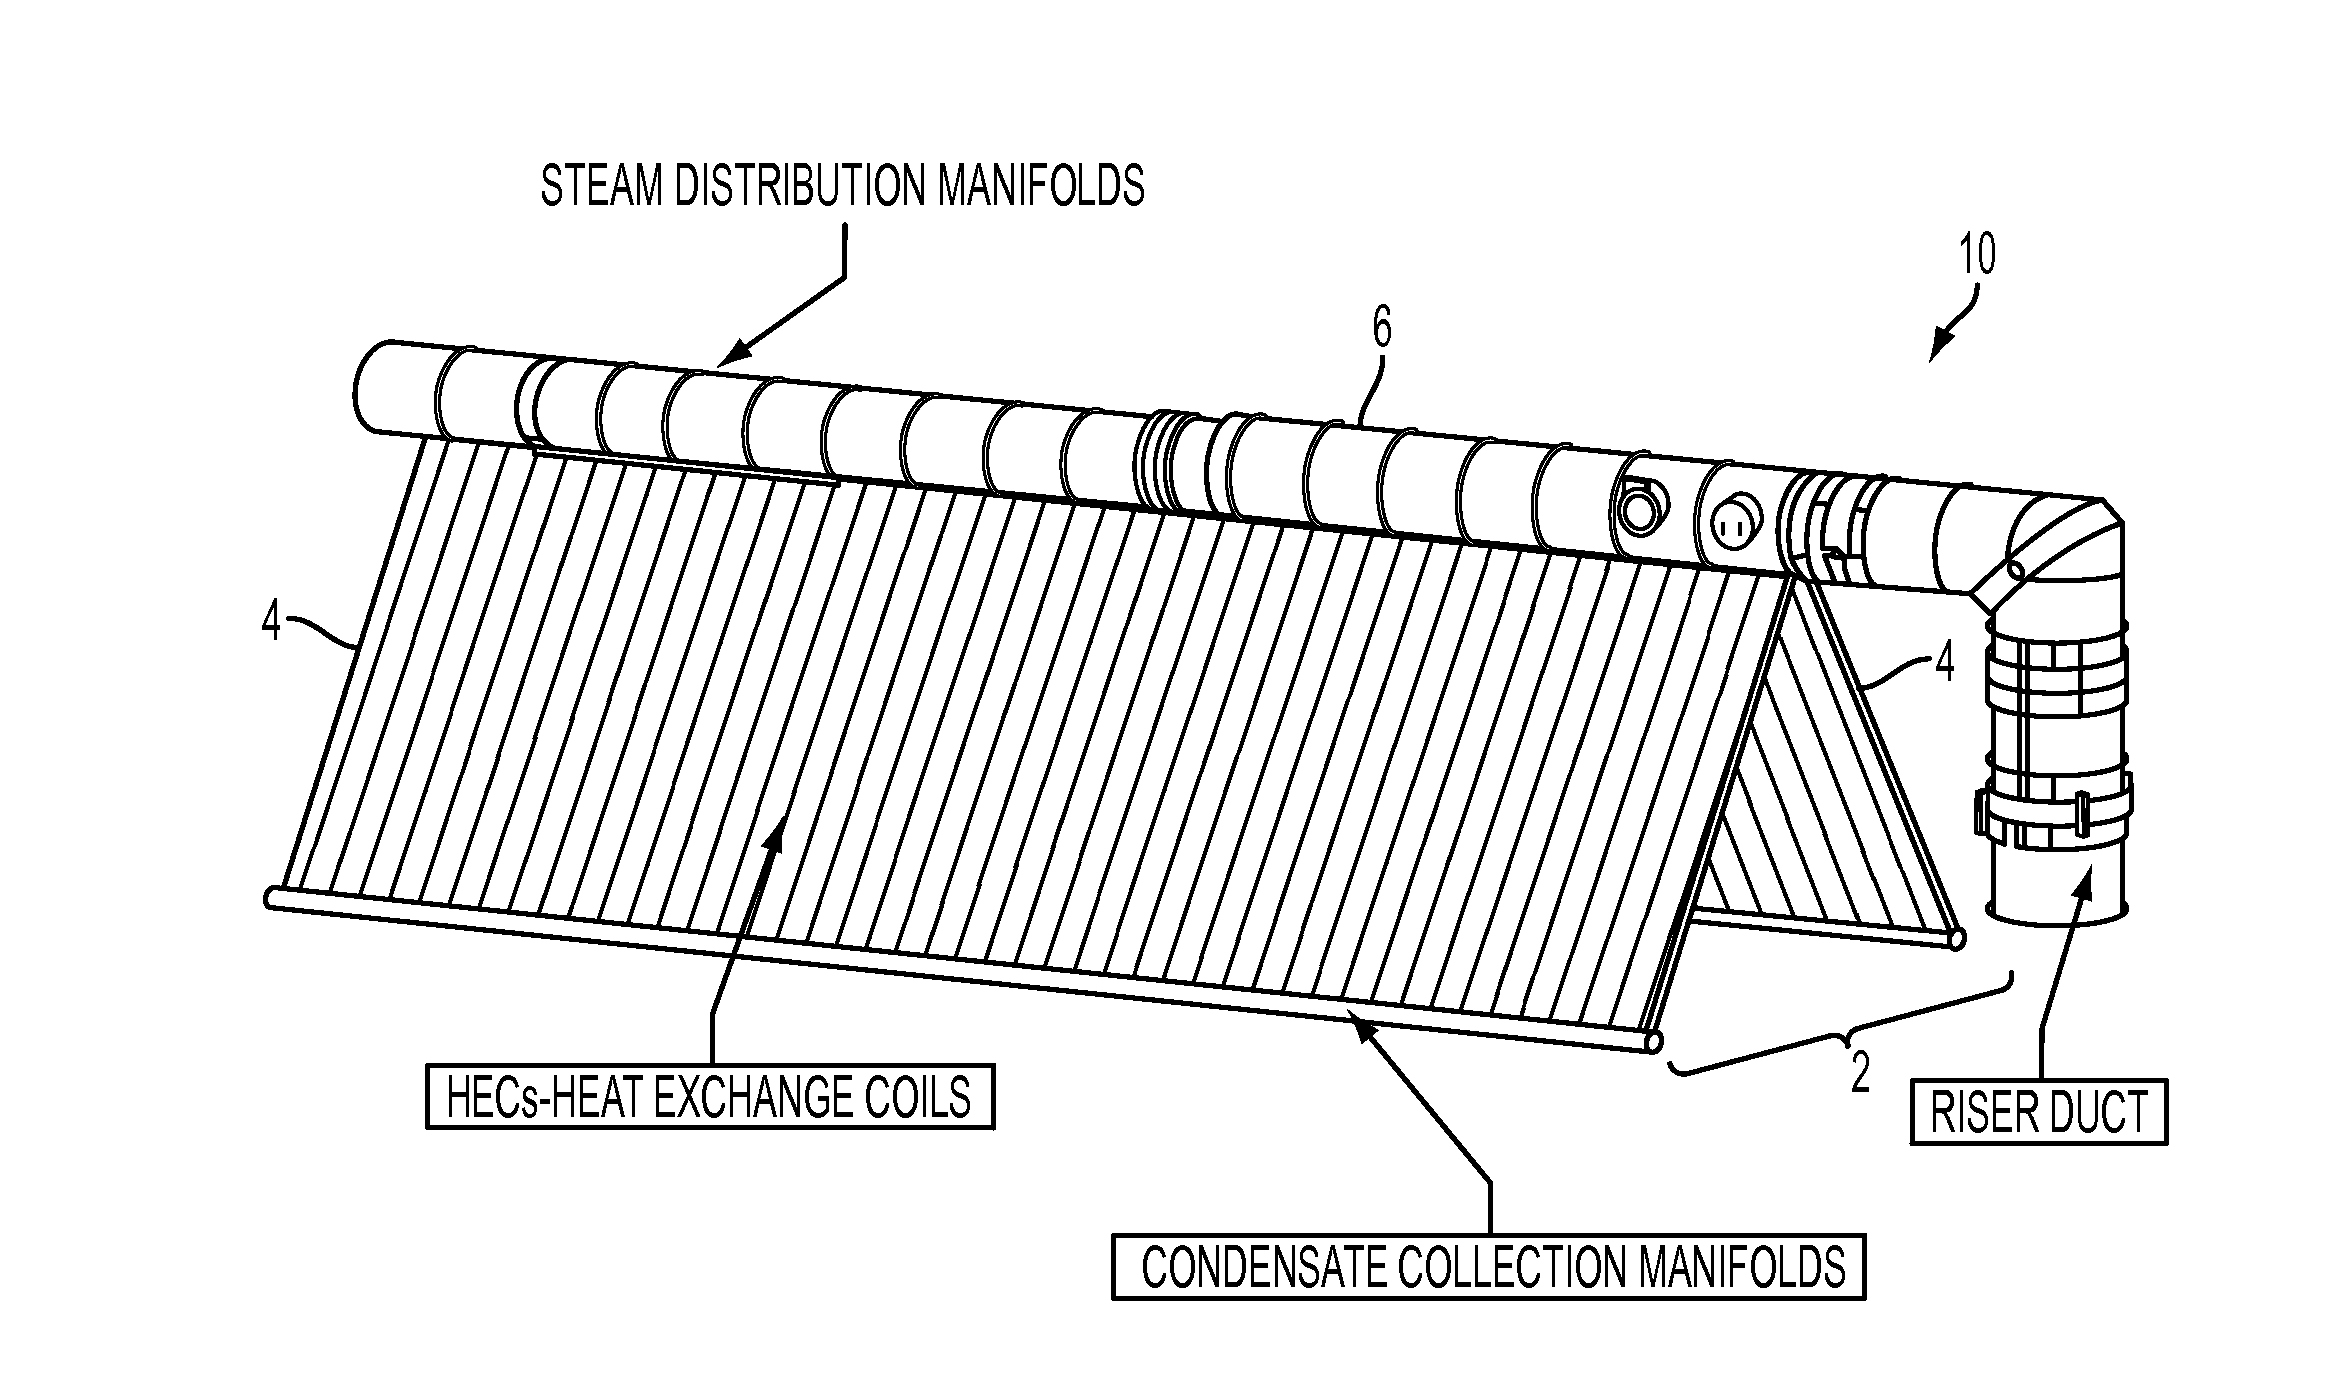 Apparatus and Method for Connecting Air Cooled Condenser Heat Exchanger Coils to Steam Distribution Manifold